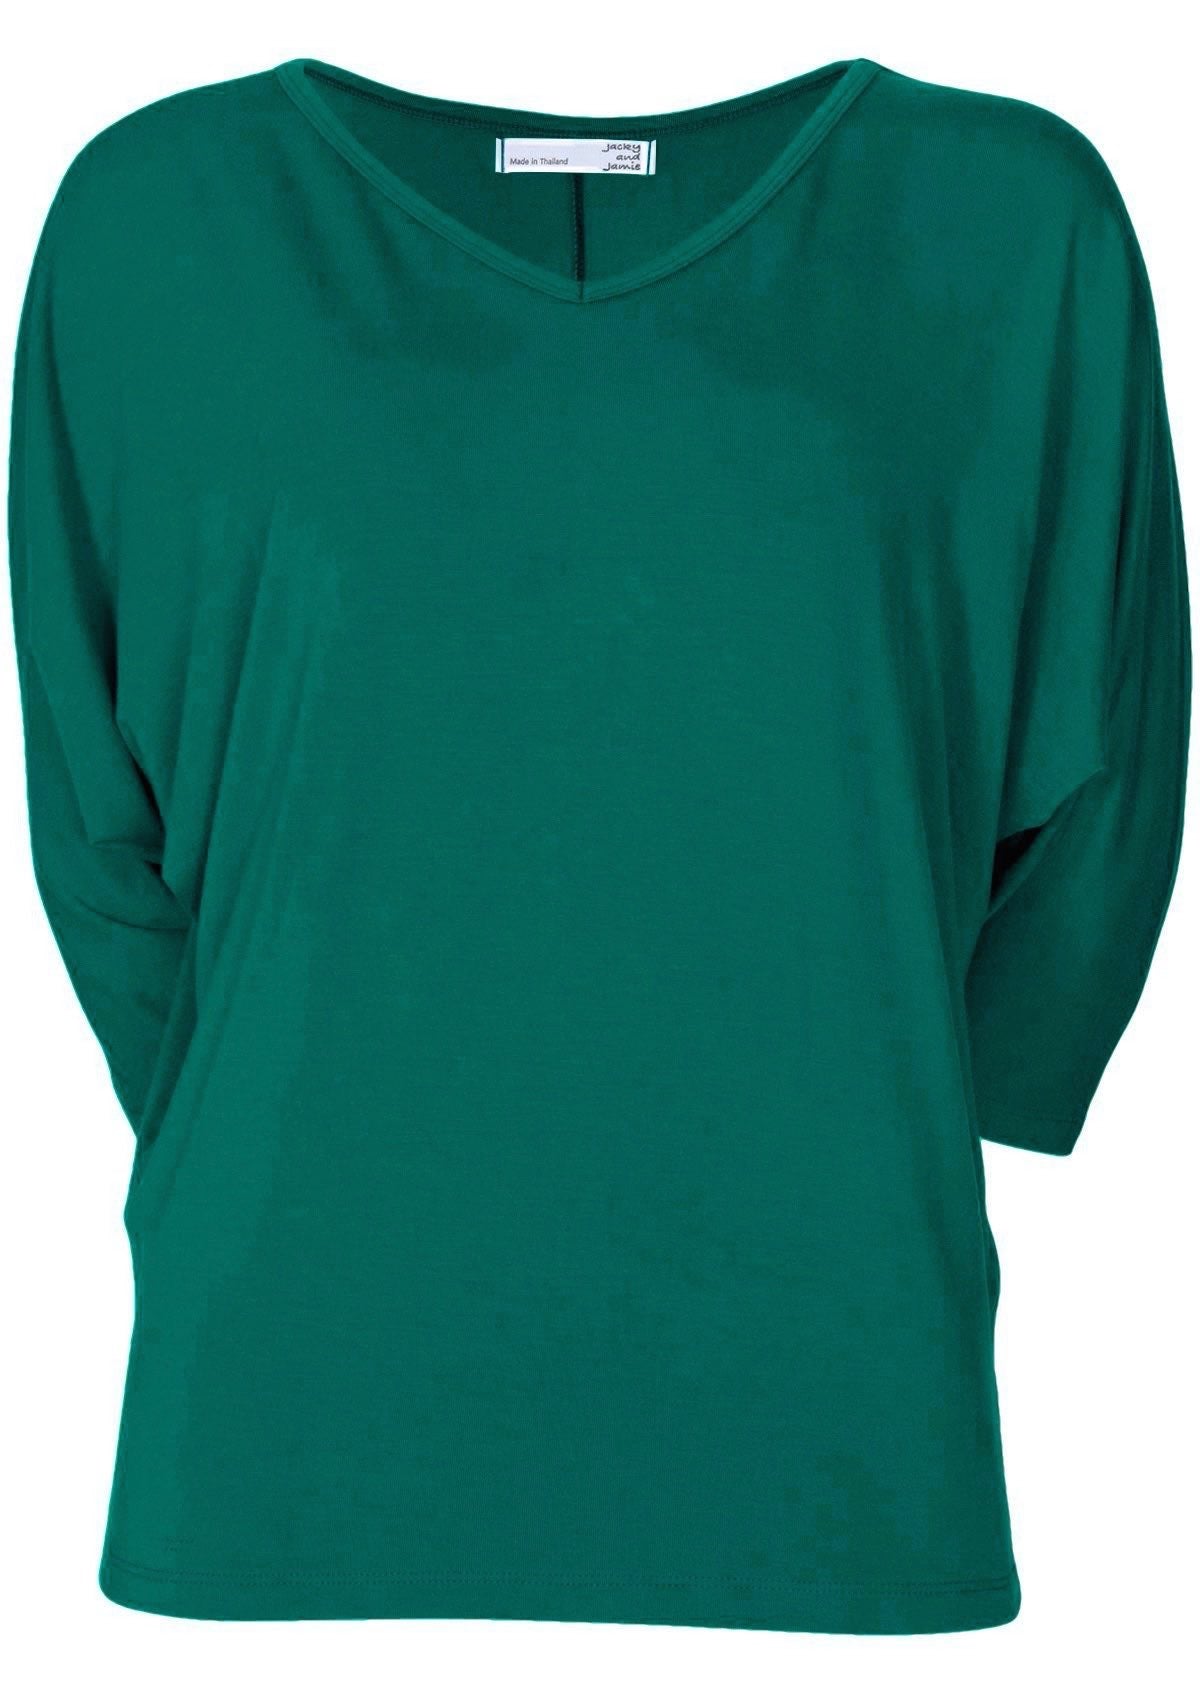 Front view women's 3/4 sleeve rayon batwing v-neck green top.